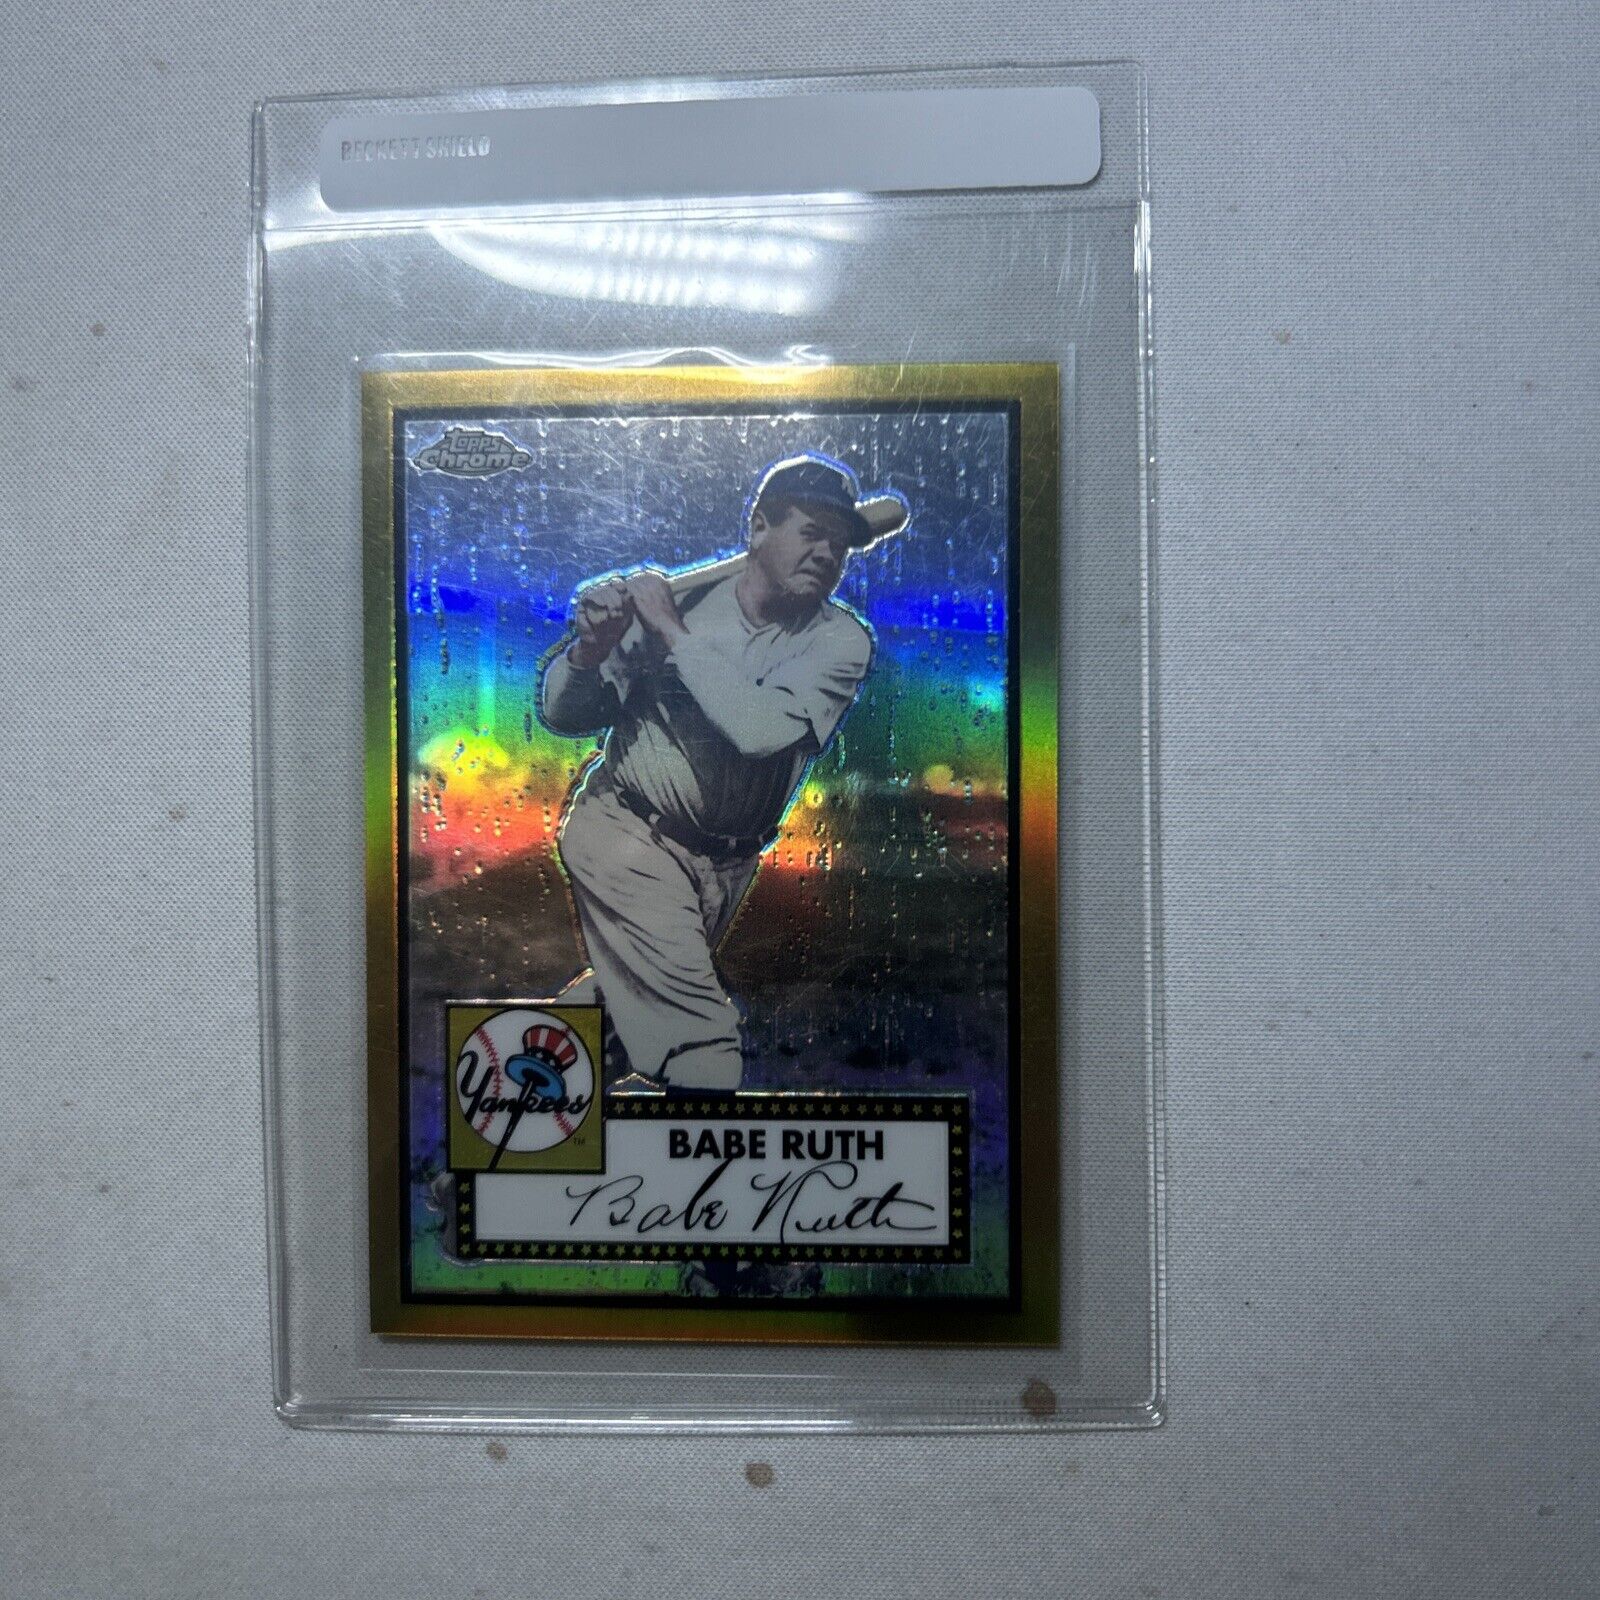 Babe Ruth 2009 Topps Chrome 1 Of 3 Gold Holo + Babe Ruth Topps /299